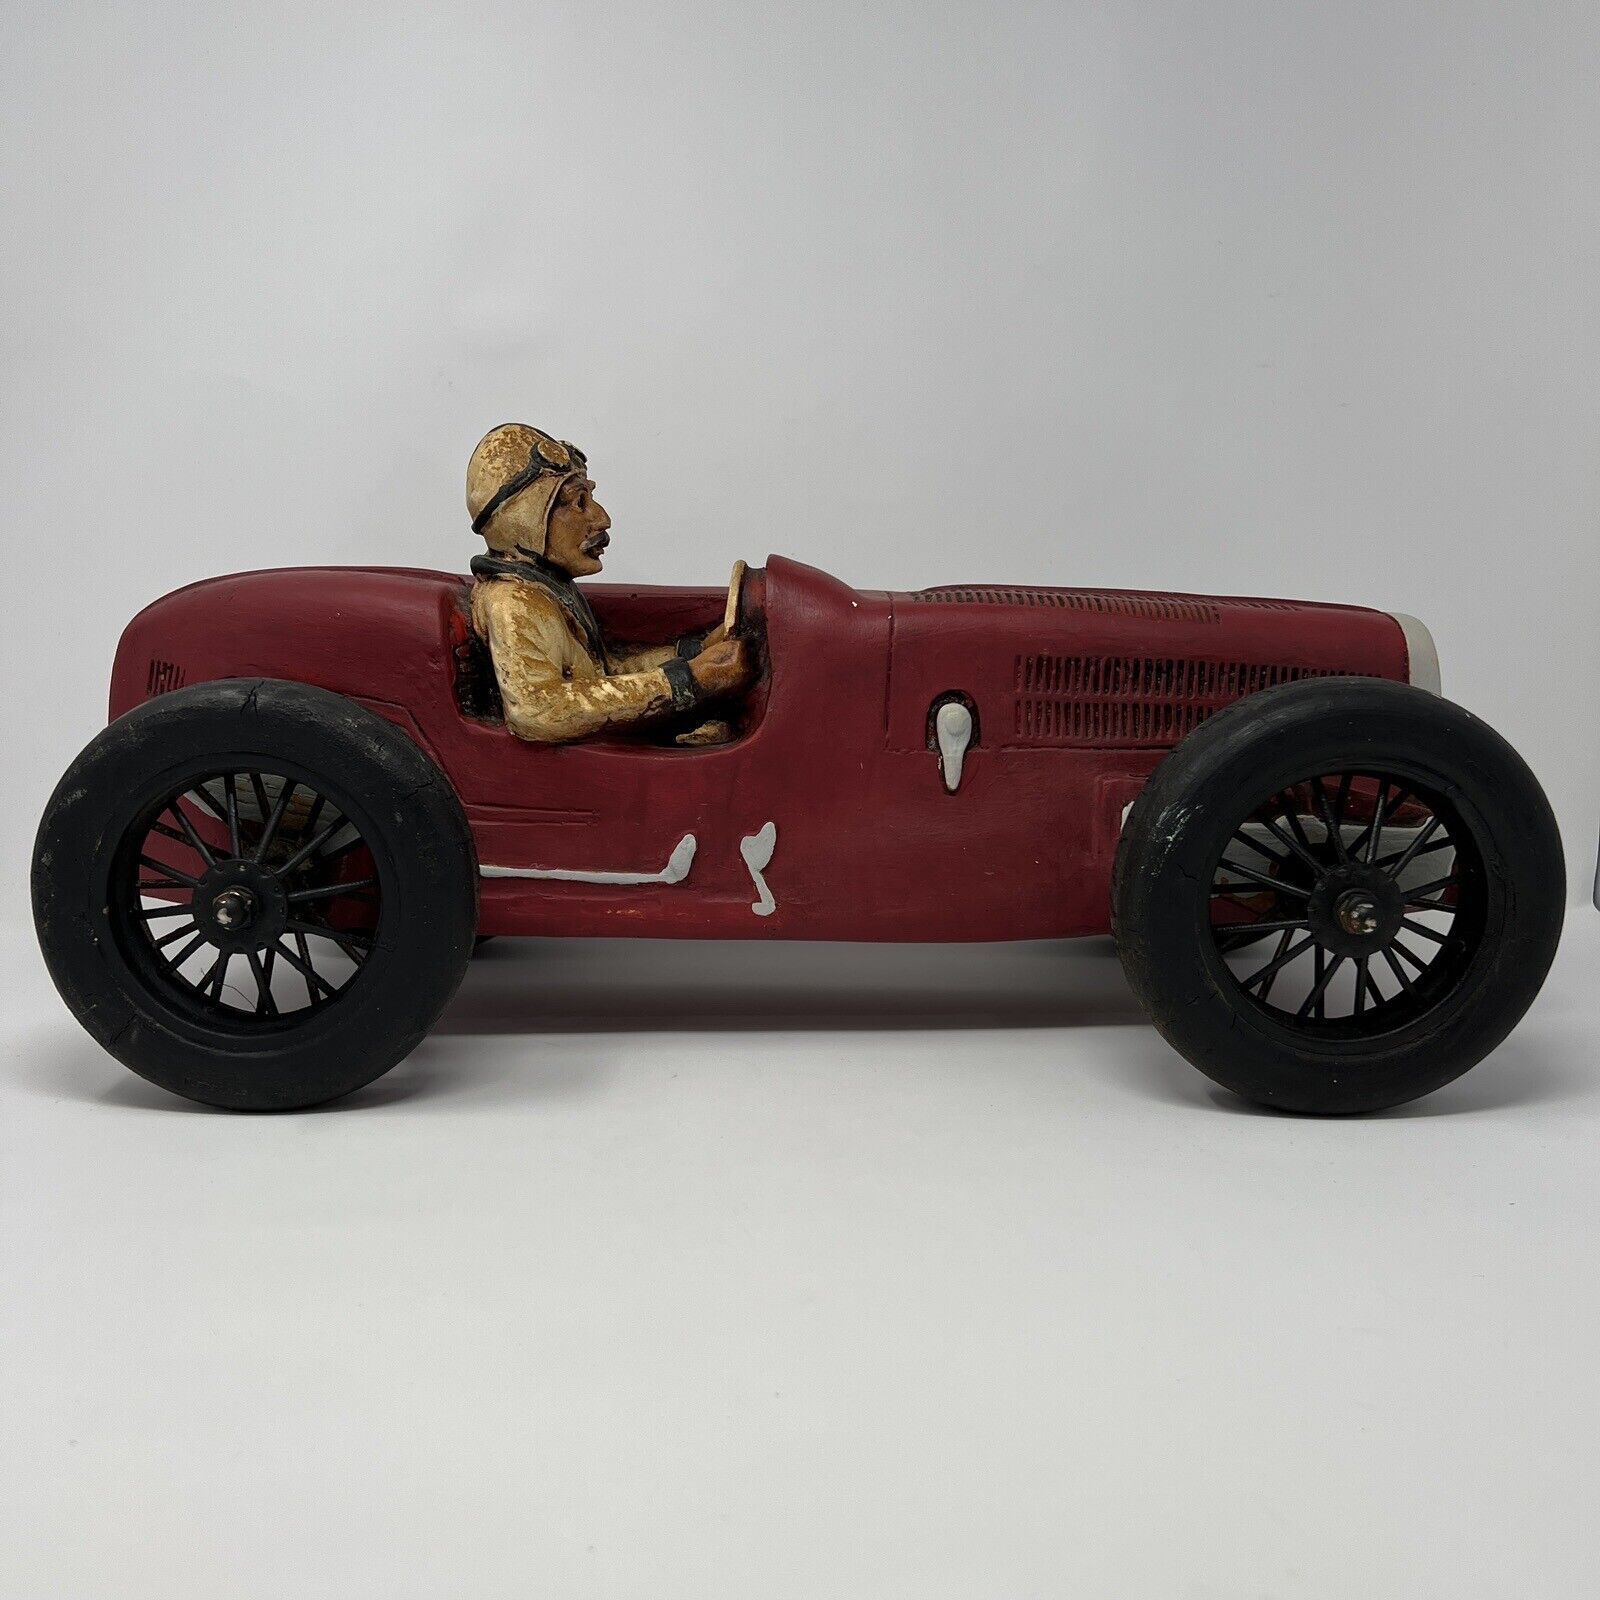 Rare Vintage Bugatti Large Racing Sport Car Classic Model Sculpture with Driver